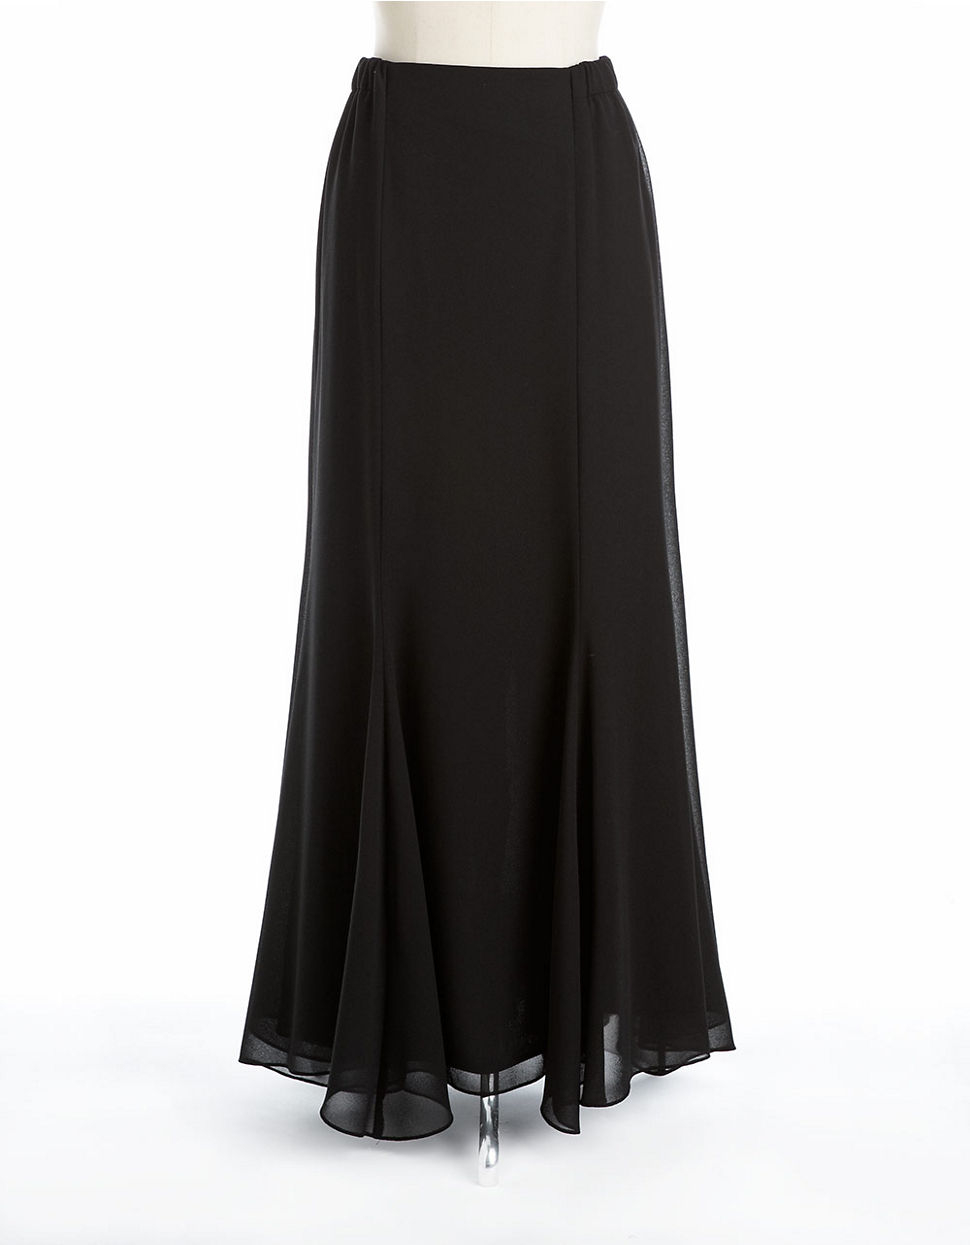 Alex Evenings Long Fit And Flare Skirt in Black - Lyst